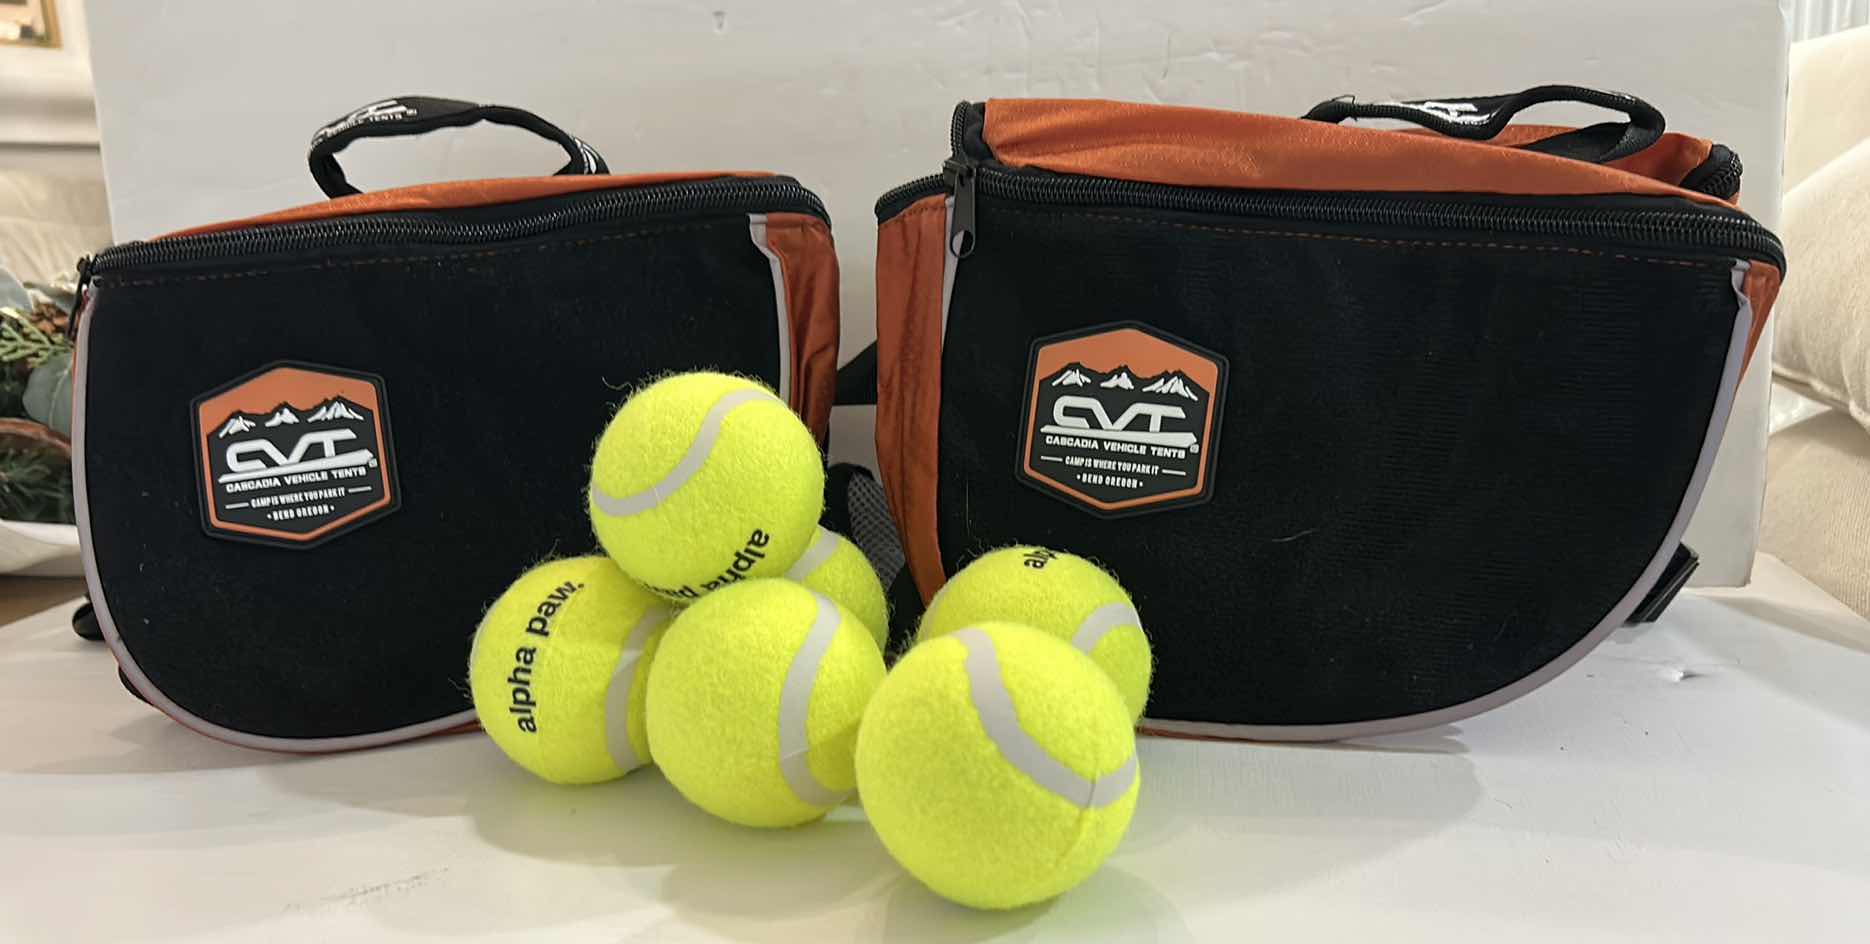 Photo 6 of NEW DOG ASSORTMENT- 2 SMALL CVT BACKPACKS/SADDLE BAGS AND 6 ALPHA PAWS TENNIS BALLS  $60